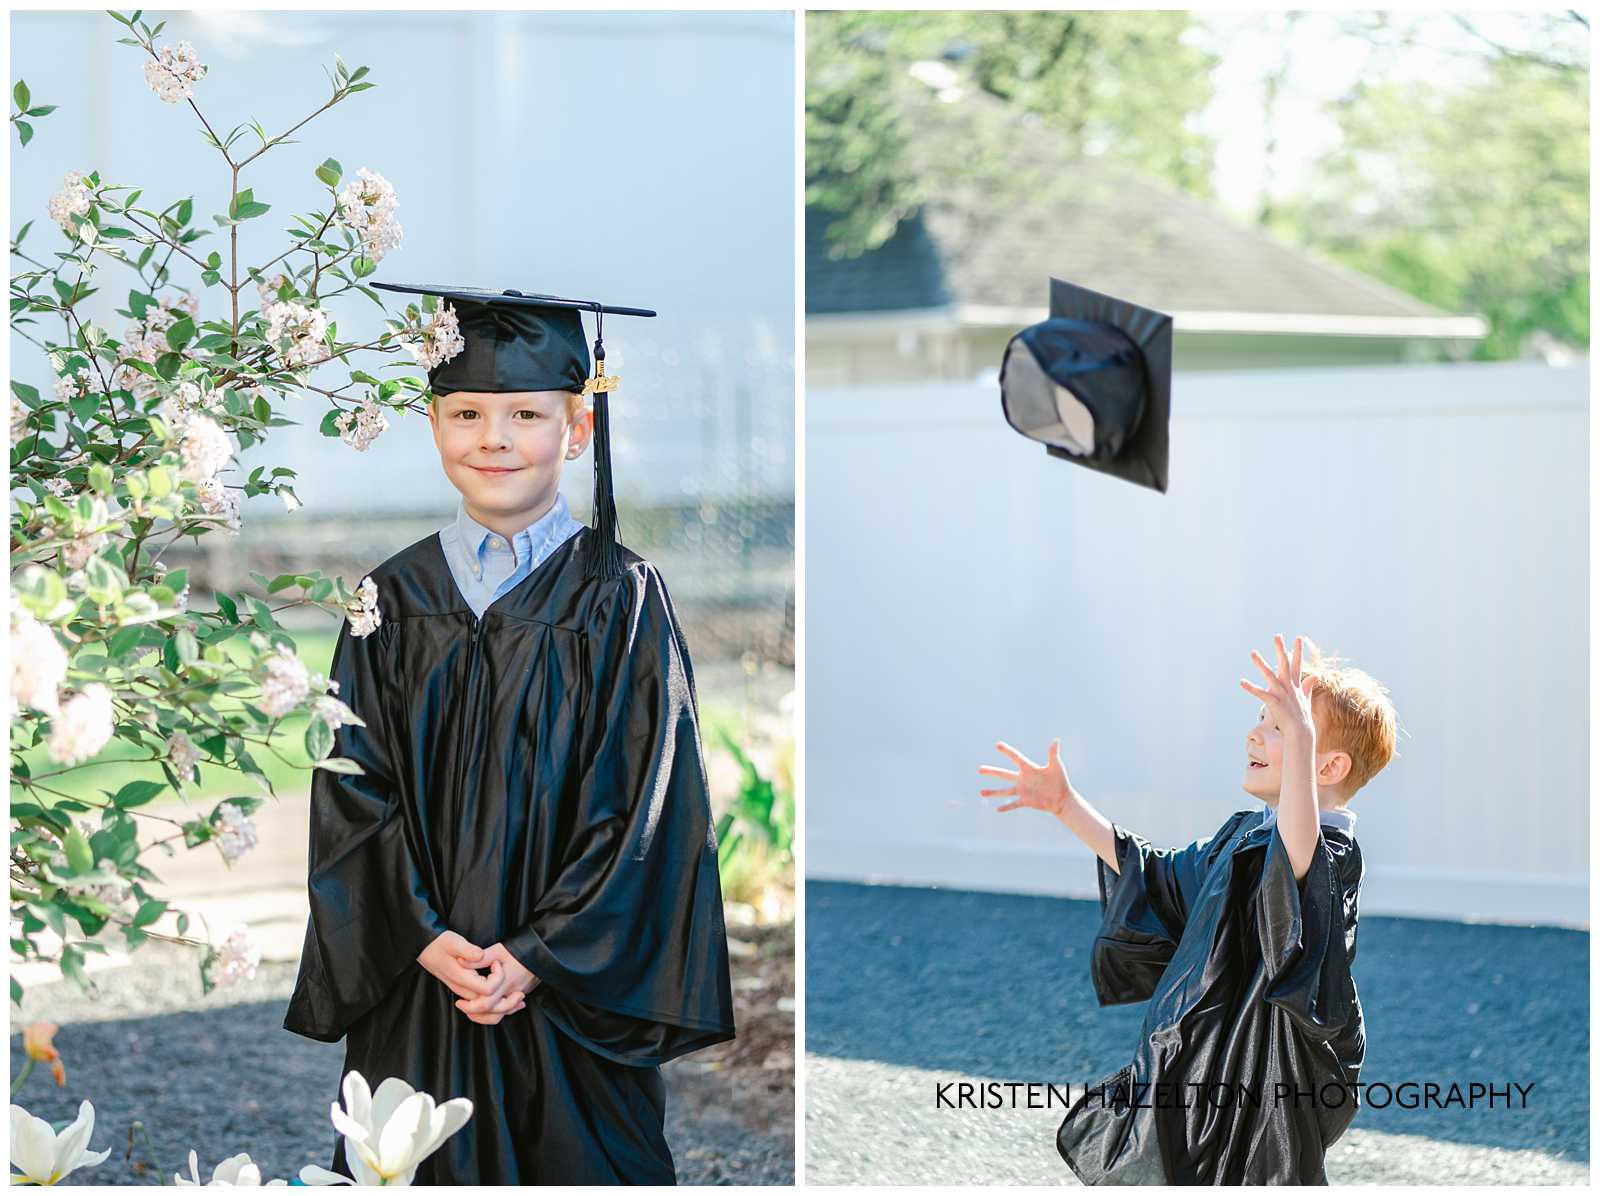 kindergarten graduate wearing graduation robes and throwing a cap in the air